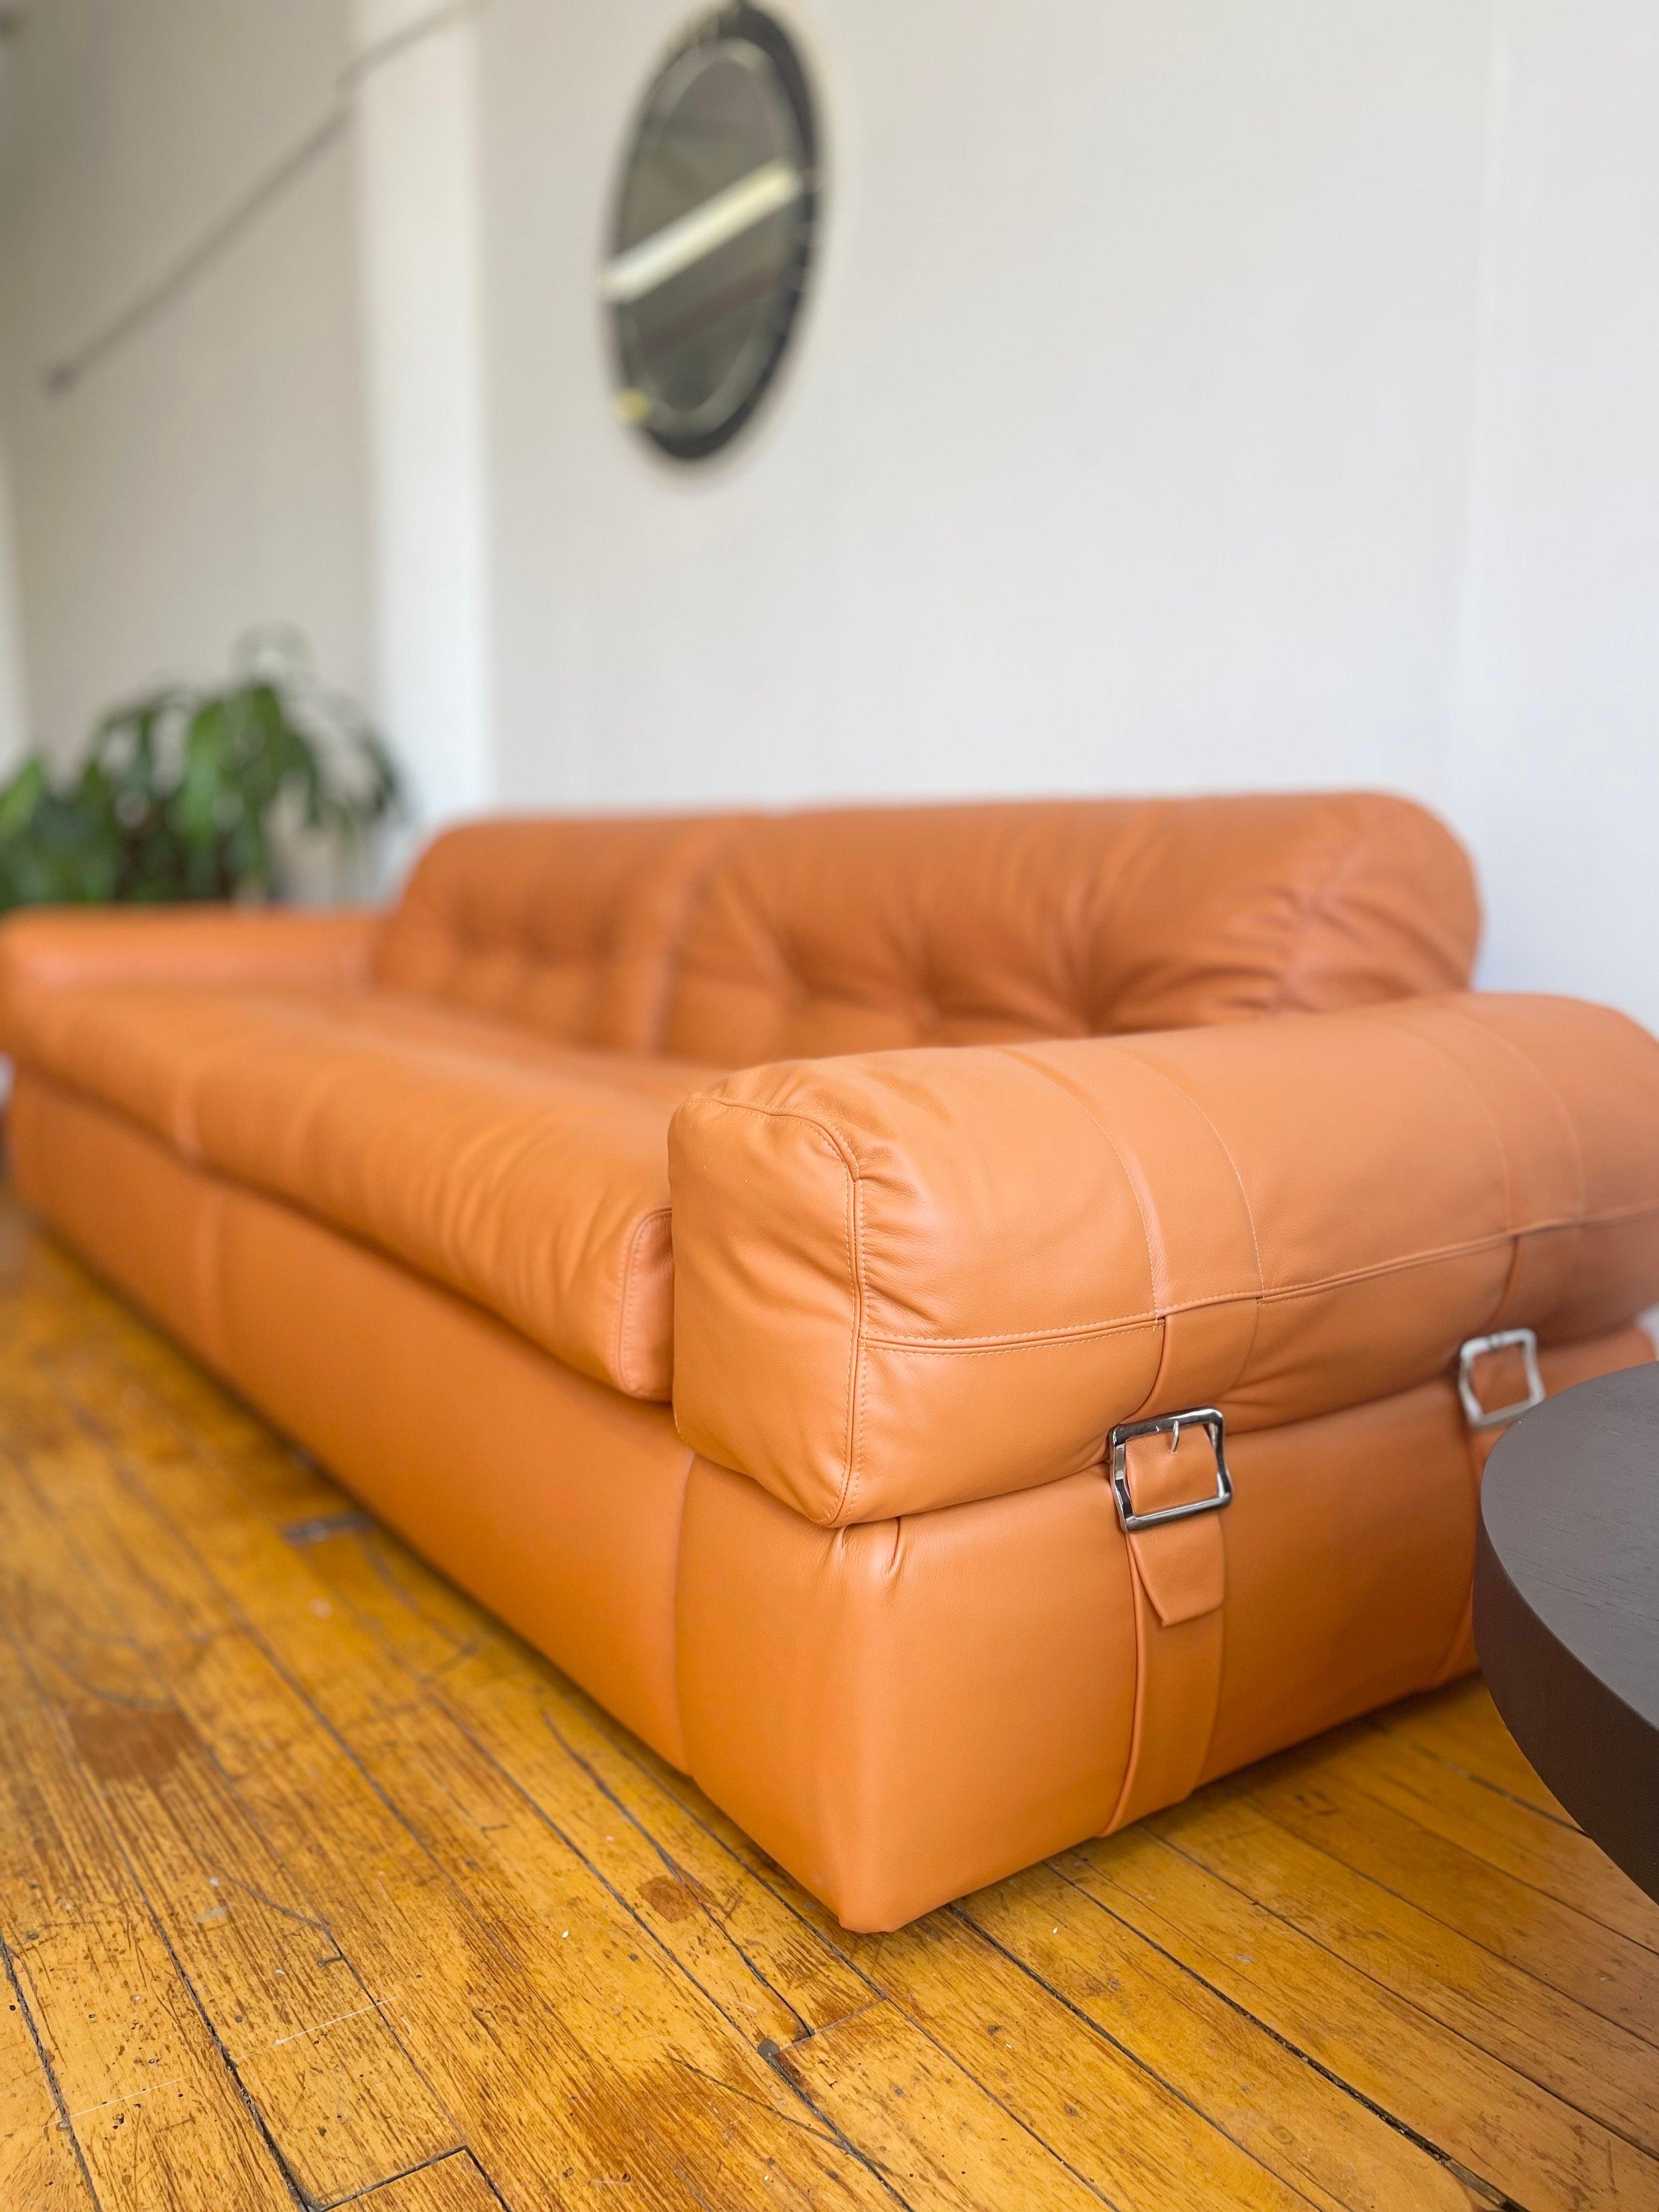 Adriano Piazzesi 1970s Sofa Newly Upholstered with Copper Brown Italian Leather For Sale 8